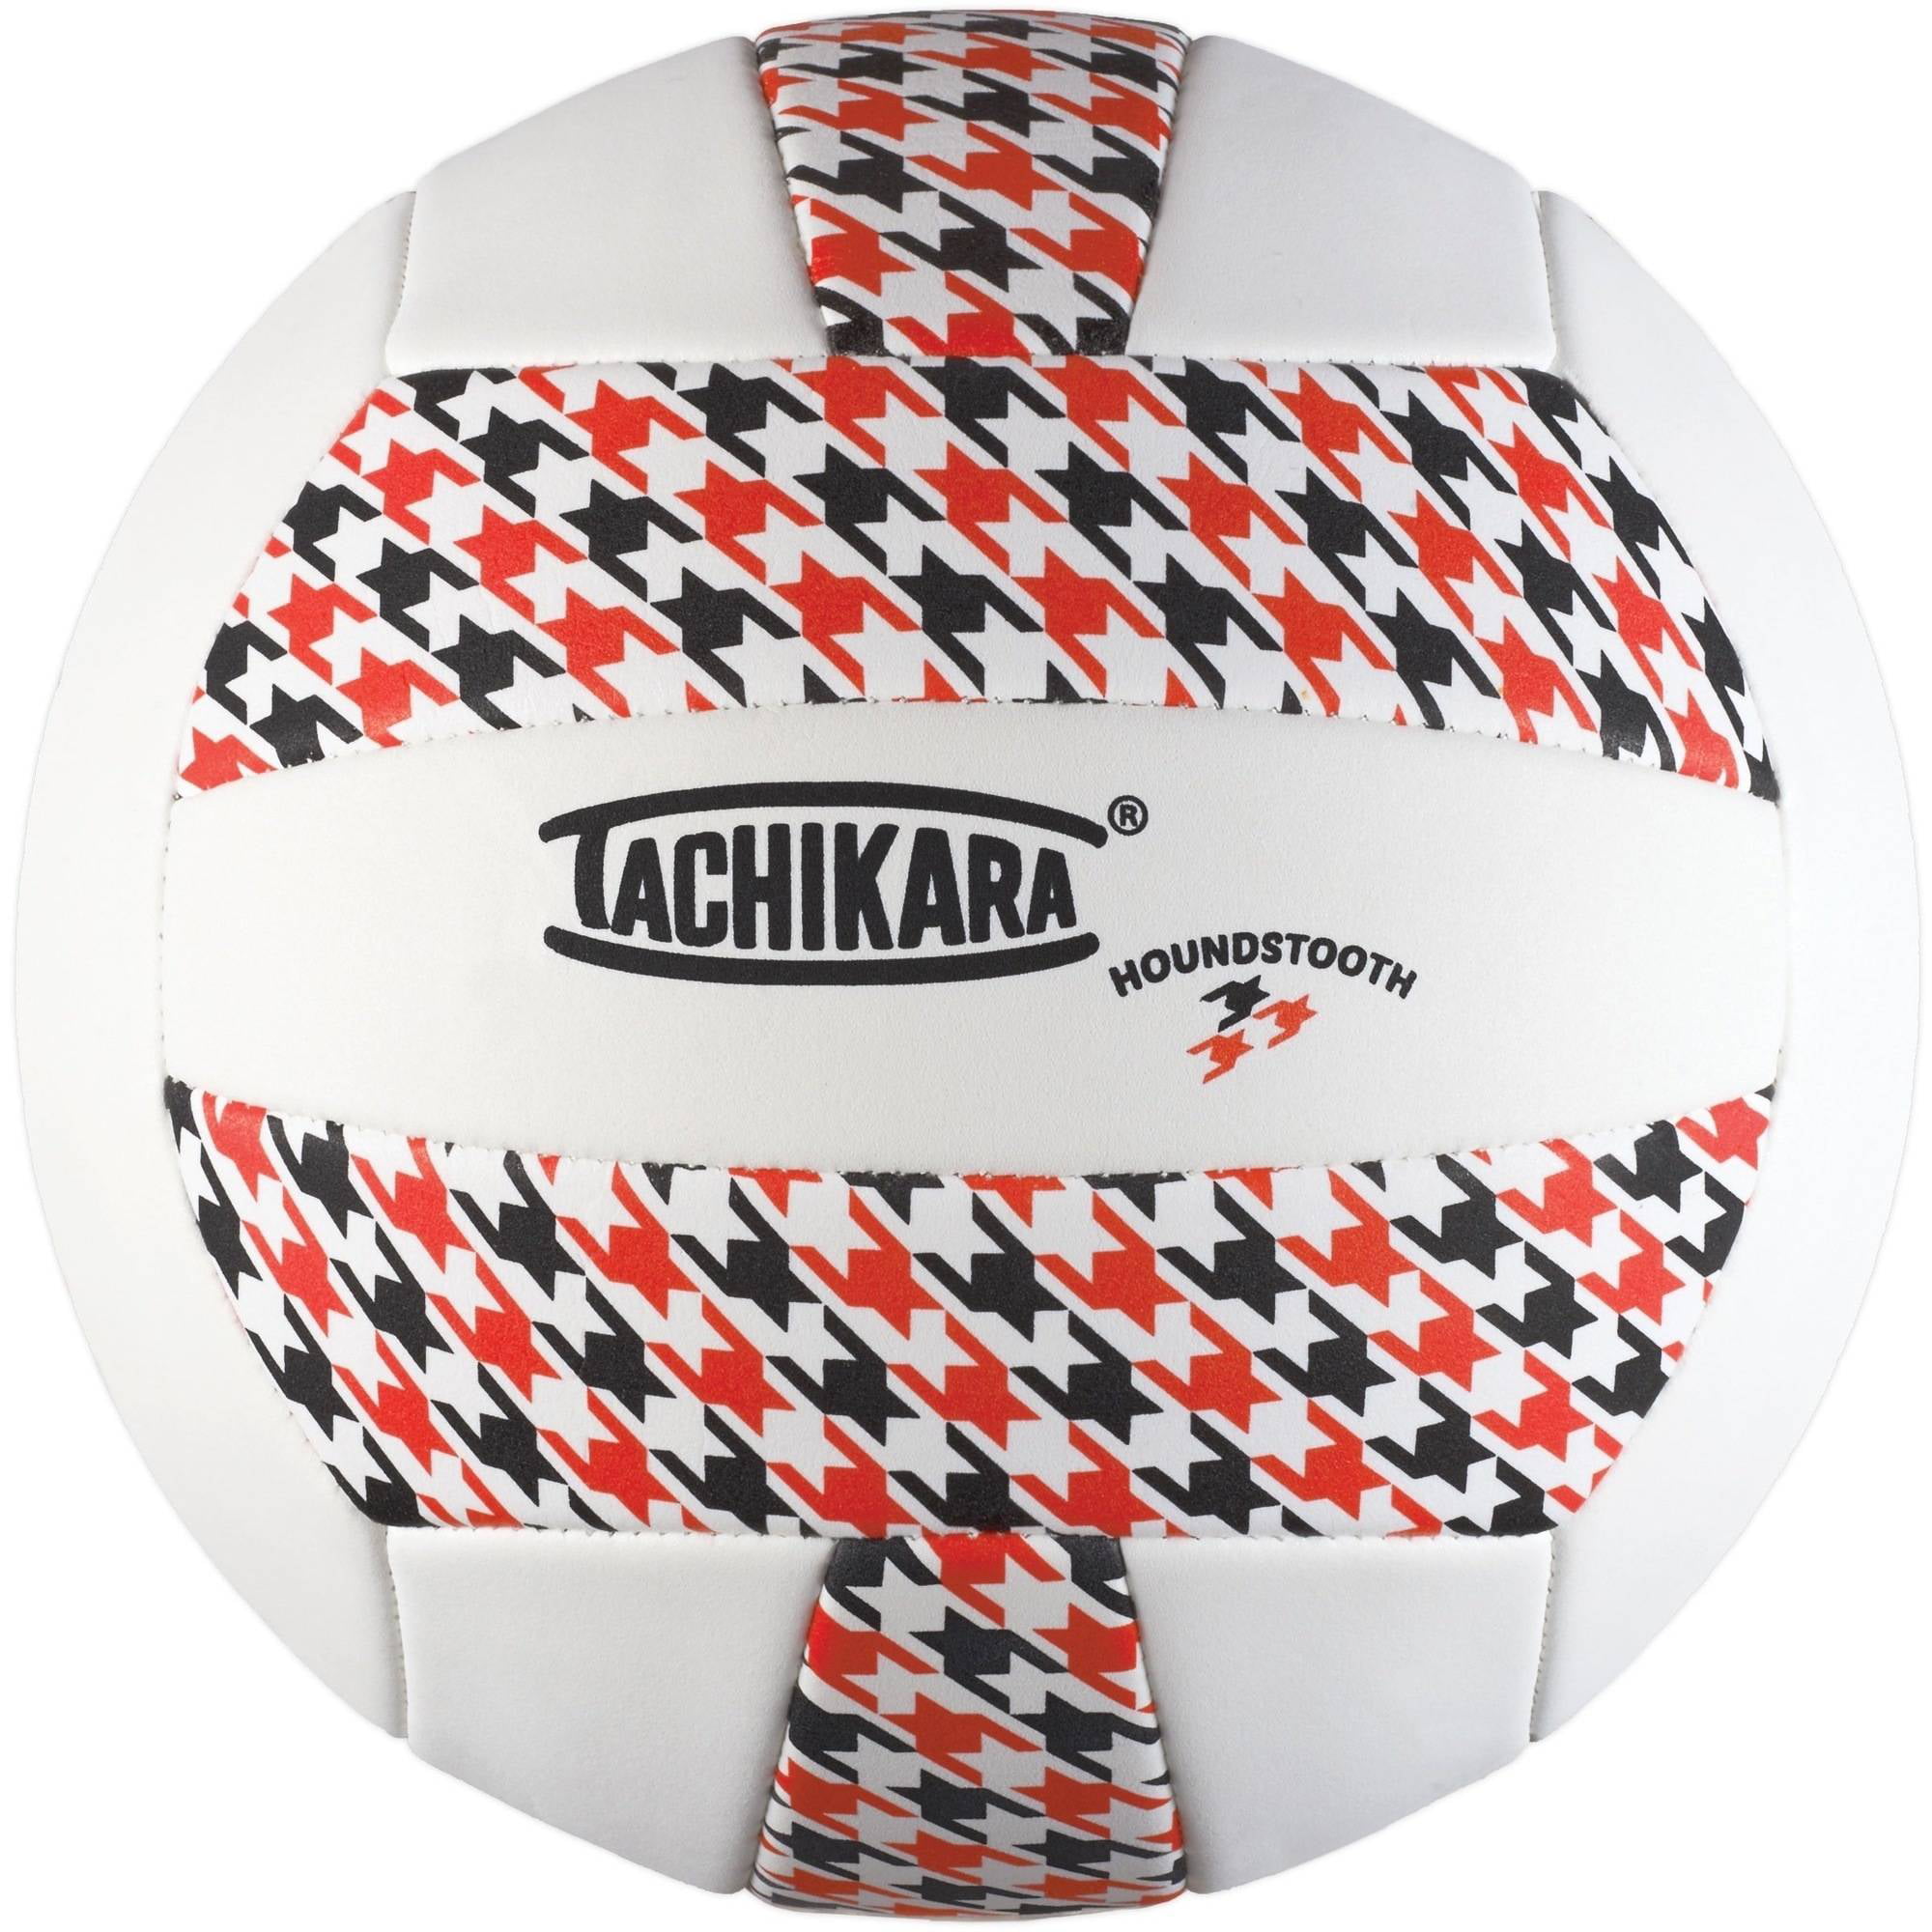 Tachikara Softec Leopard No Sting Recreational Volleyball for sale online 